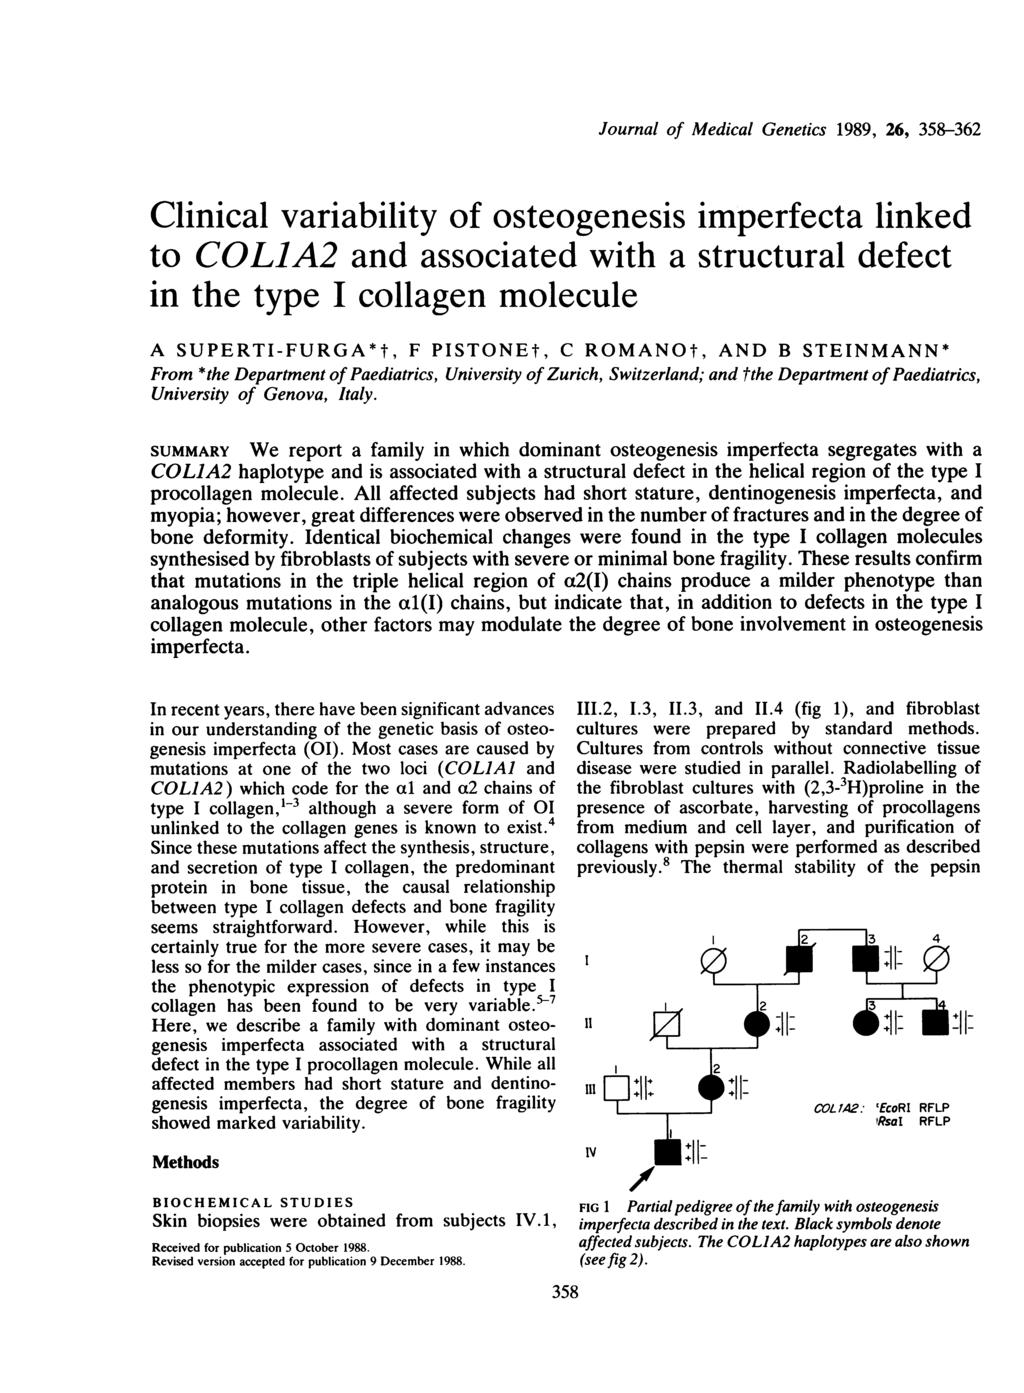 Clinical variability of osteogenesis to COL1A2 and associated with a in the type I collagen molecule Journal of Medical Genetics 1989, 26, 358-362 imperfecta linked structural defect A